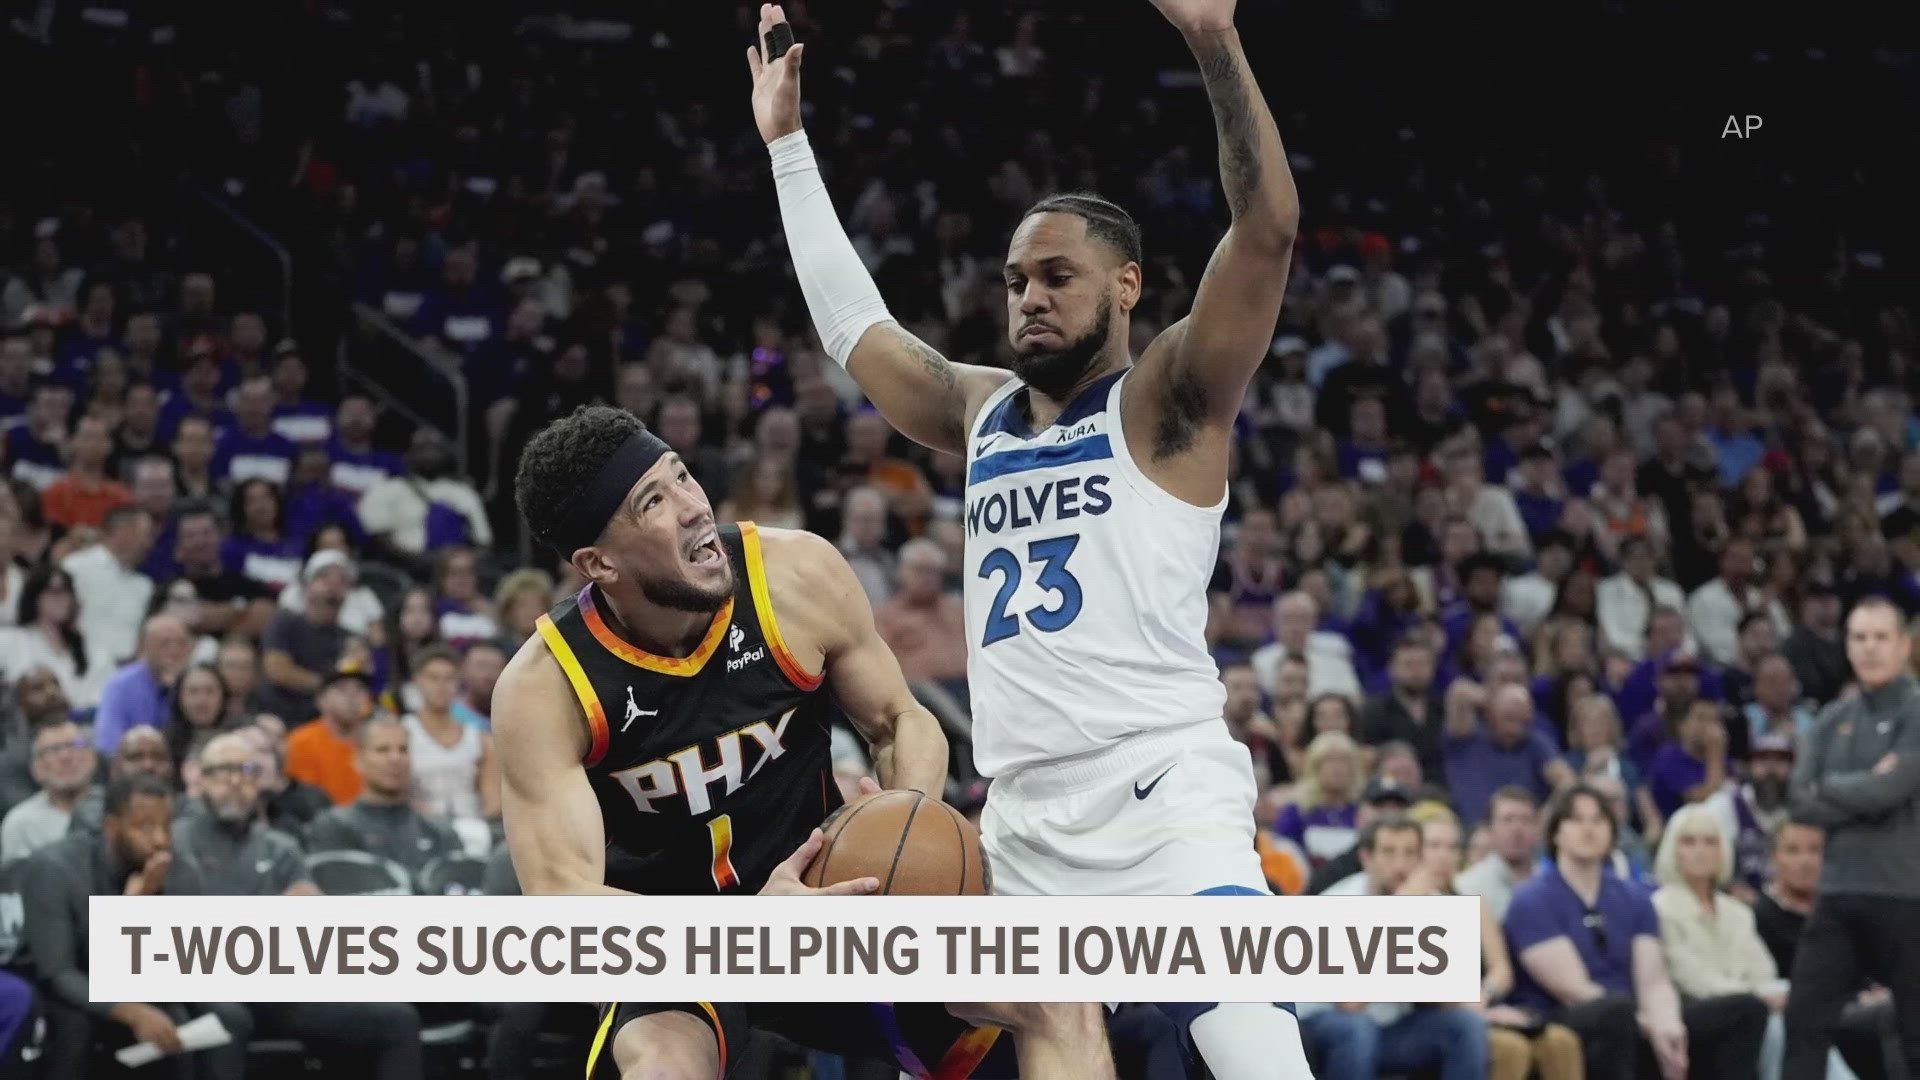 The Timberwolves 4-0 series win over Phoenix is the franchise's first playoff series win since 2004.